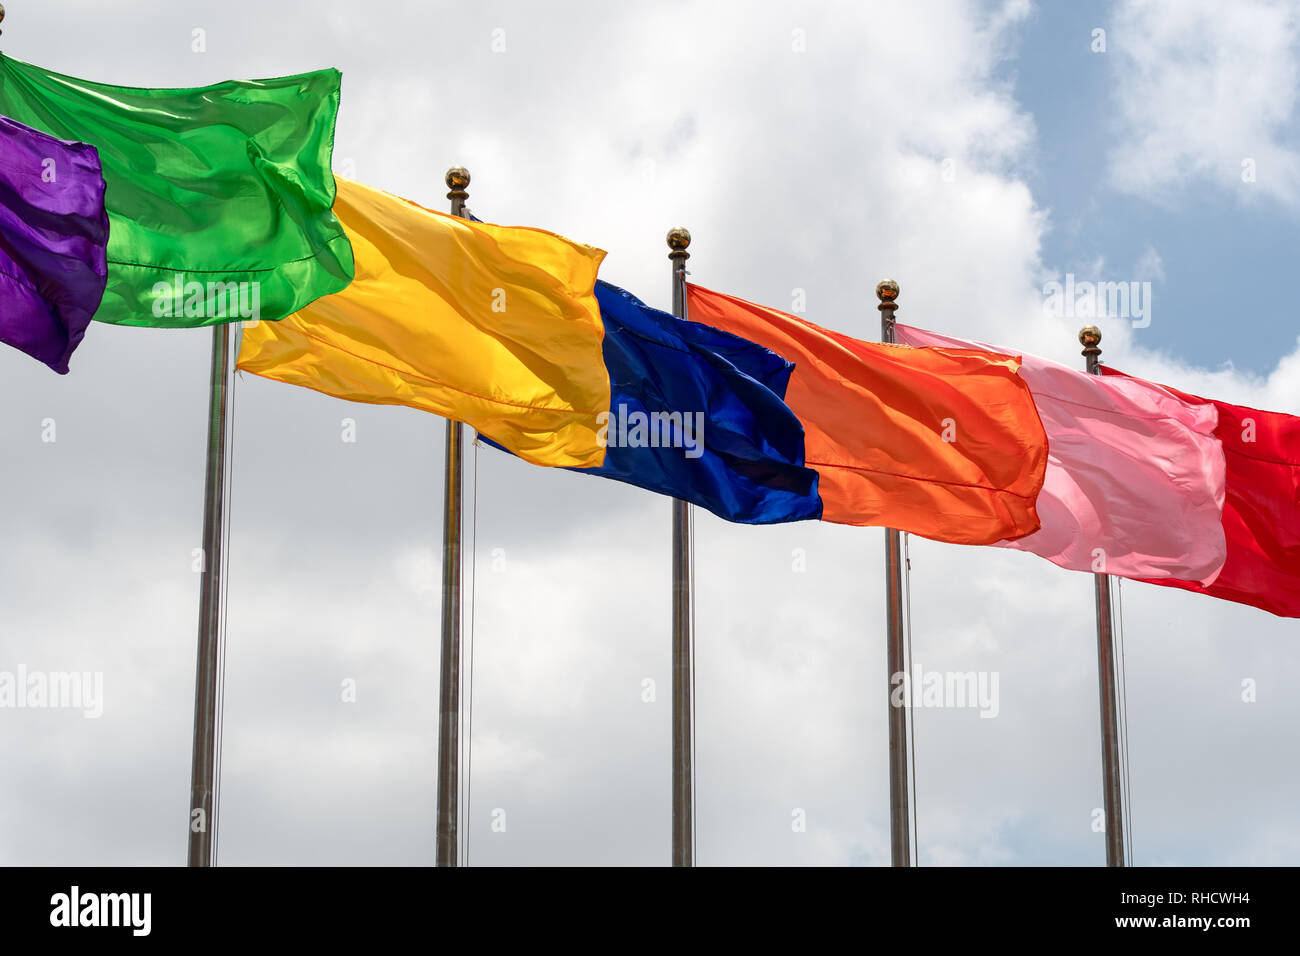 Various single-colour flags flyig from a series of flag poles in ...